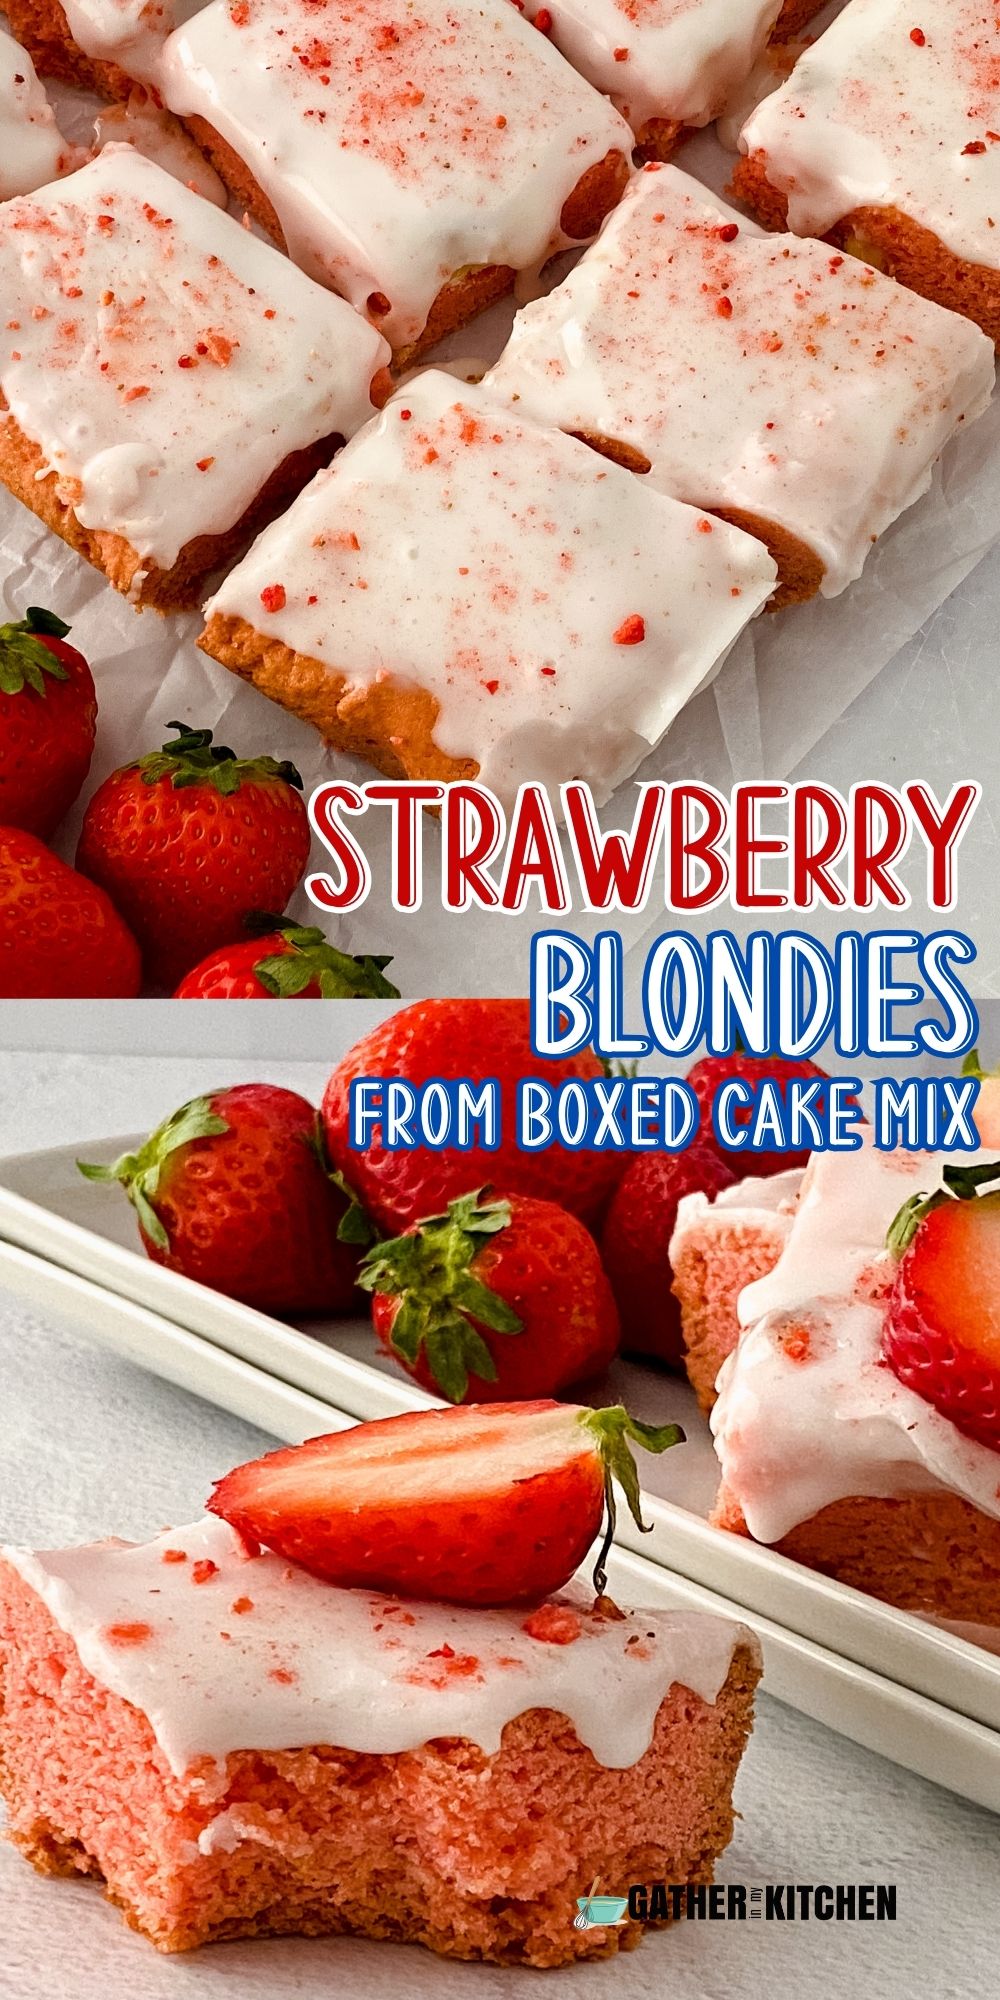 Pin image: top and bottom have strawberry blondies in them and the middle says "Strawberry Blondies from boxed cake mix".